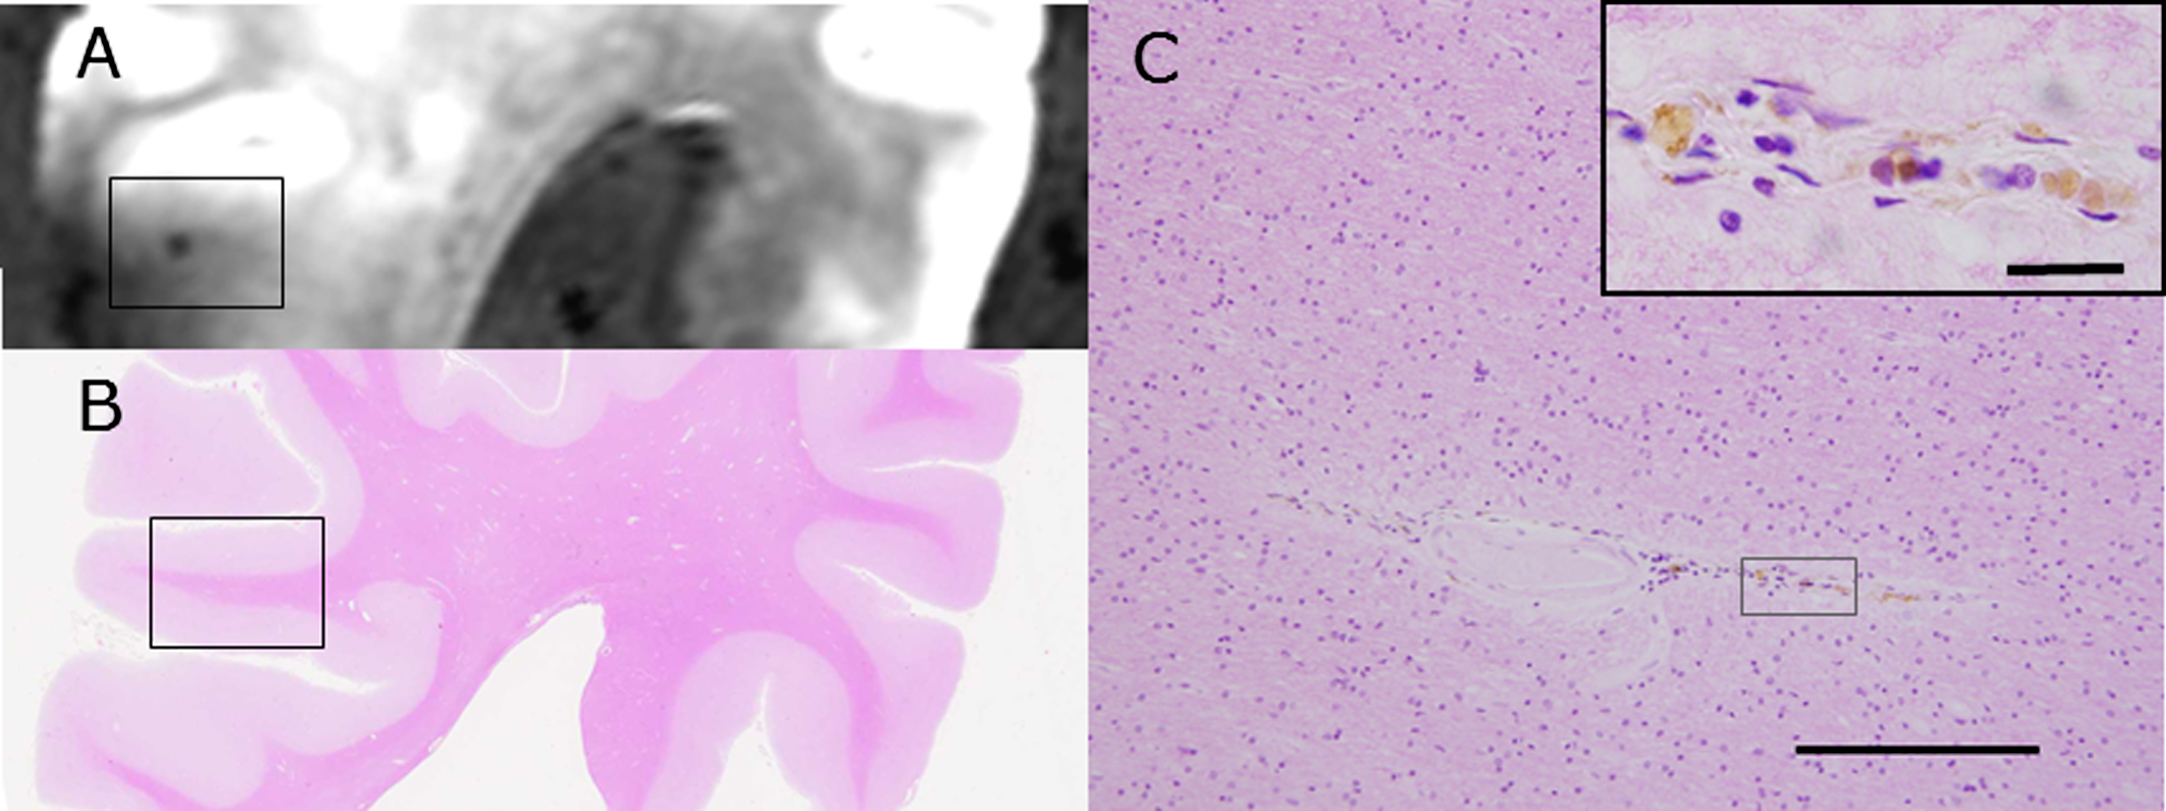 A CMB detected with SWI with postmortem 3T MRI (A) is compared with HE staining of the brain block (B) of subject C1. The rectangle in B is enlarged in C and shows accumulation of hemosiderin-laden macrophages around the small vessels (Inset). Scale bars in C: 200 μm (inset: 20 μm).